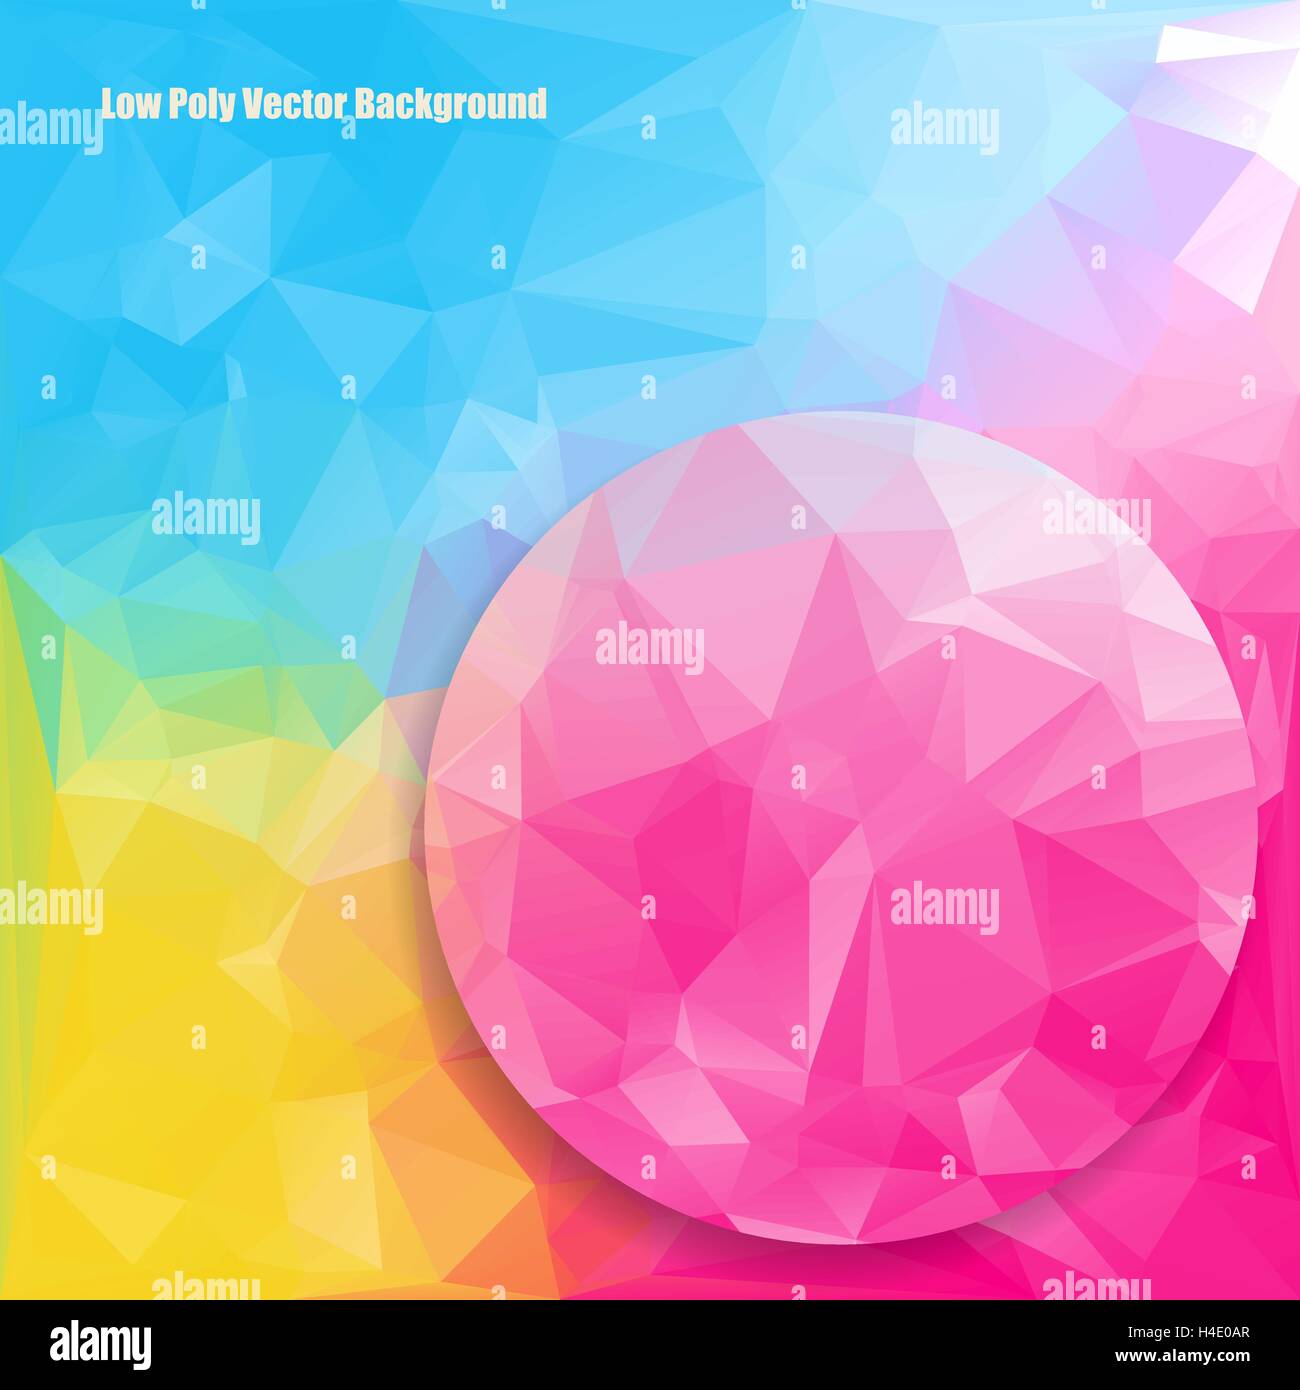 low polygonal bright color background with pink circle abstract backdrop vector illustration Stock Vector